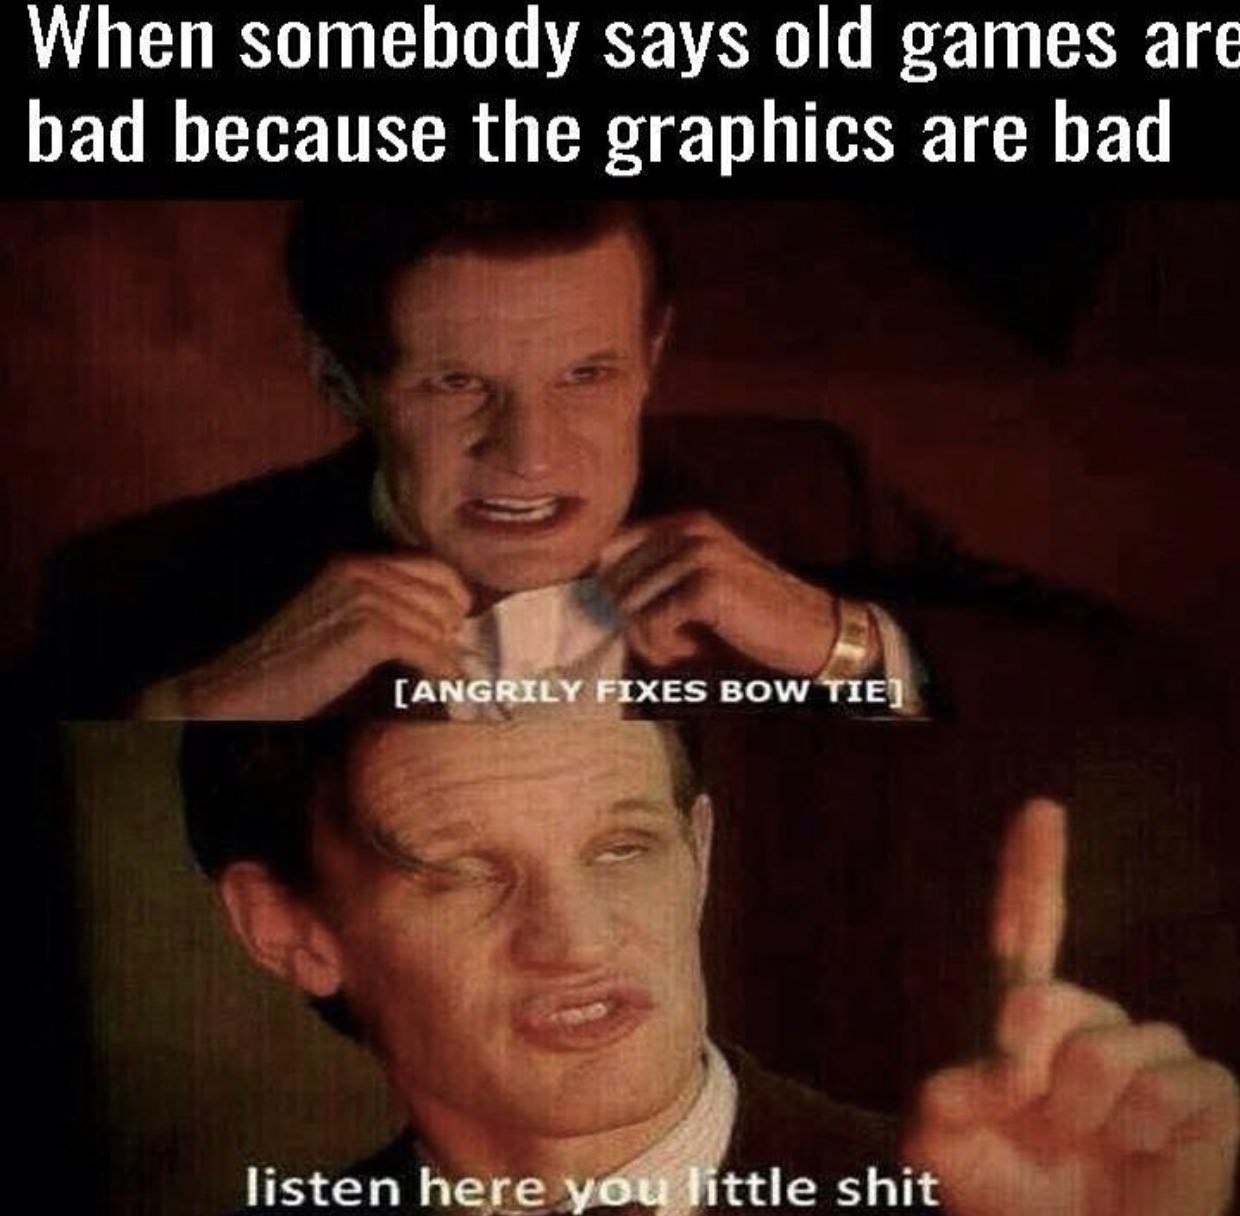 listen here little shit - When somebody says old games are bad because the graphics are bad Angrily Fixes Bow Tie listen here you little shit